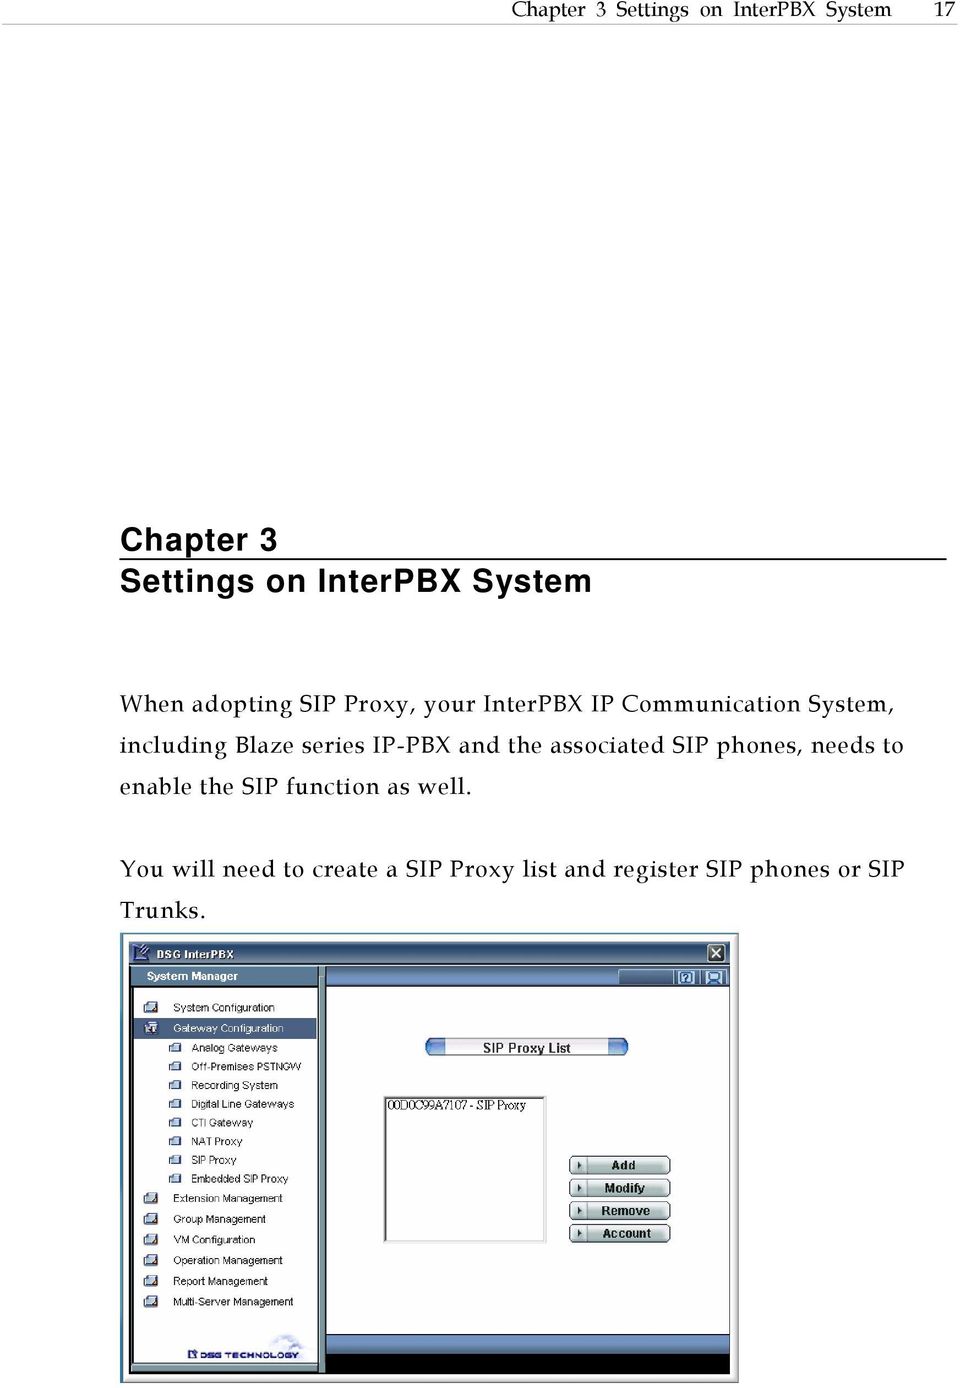 series IP-PBX and the associated SIP phones, needs to enable the SIP function as